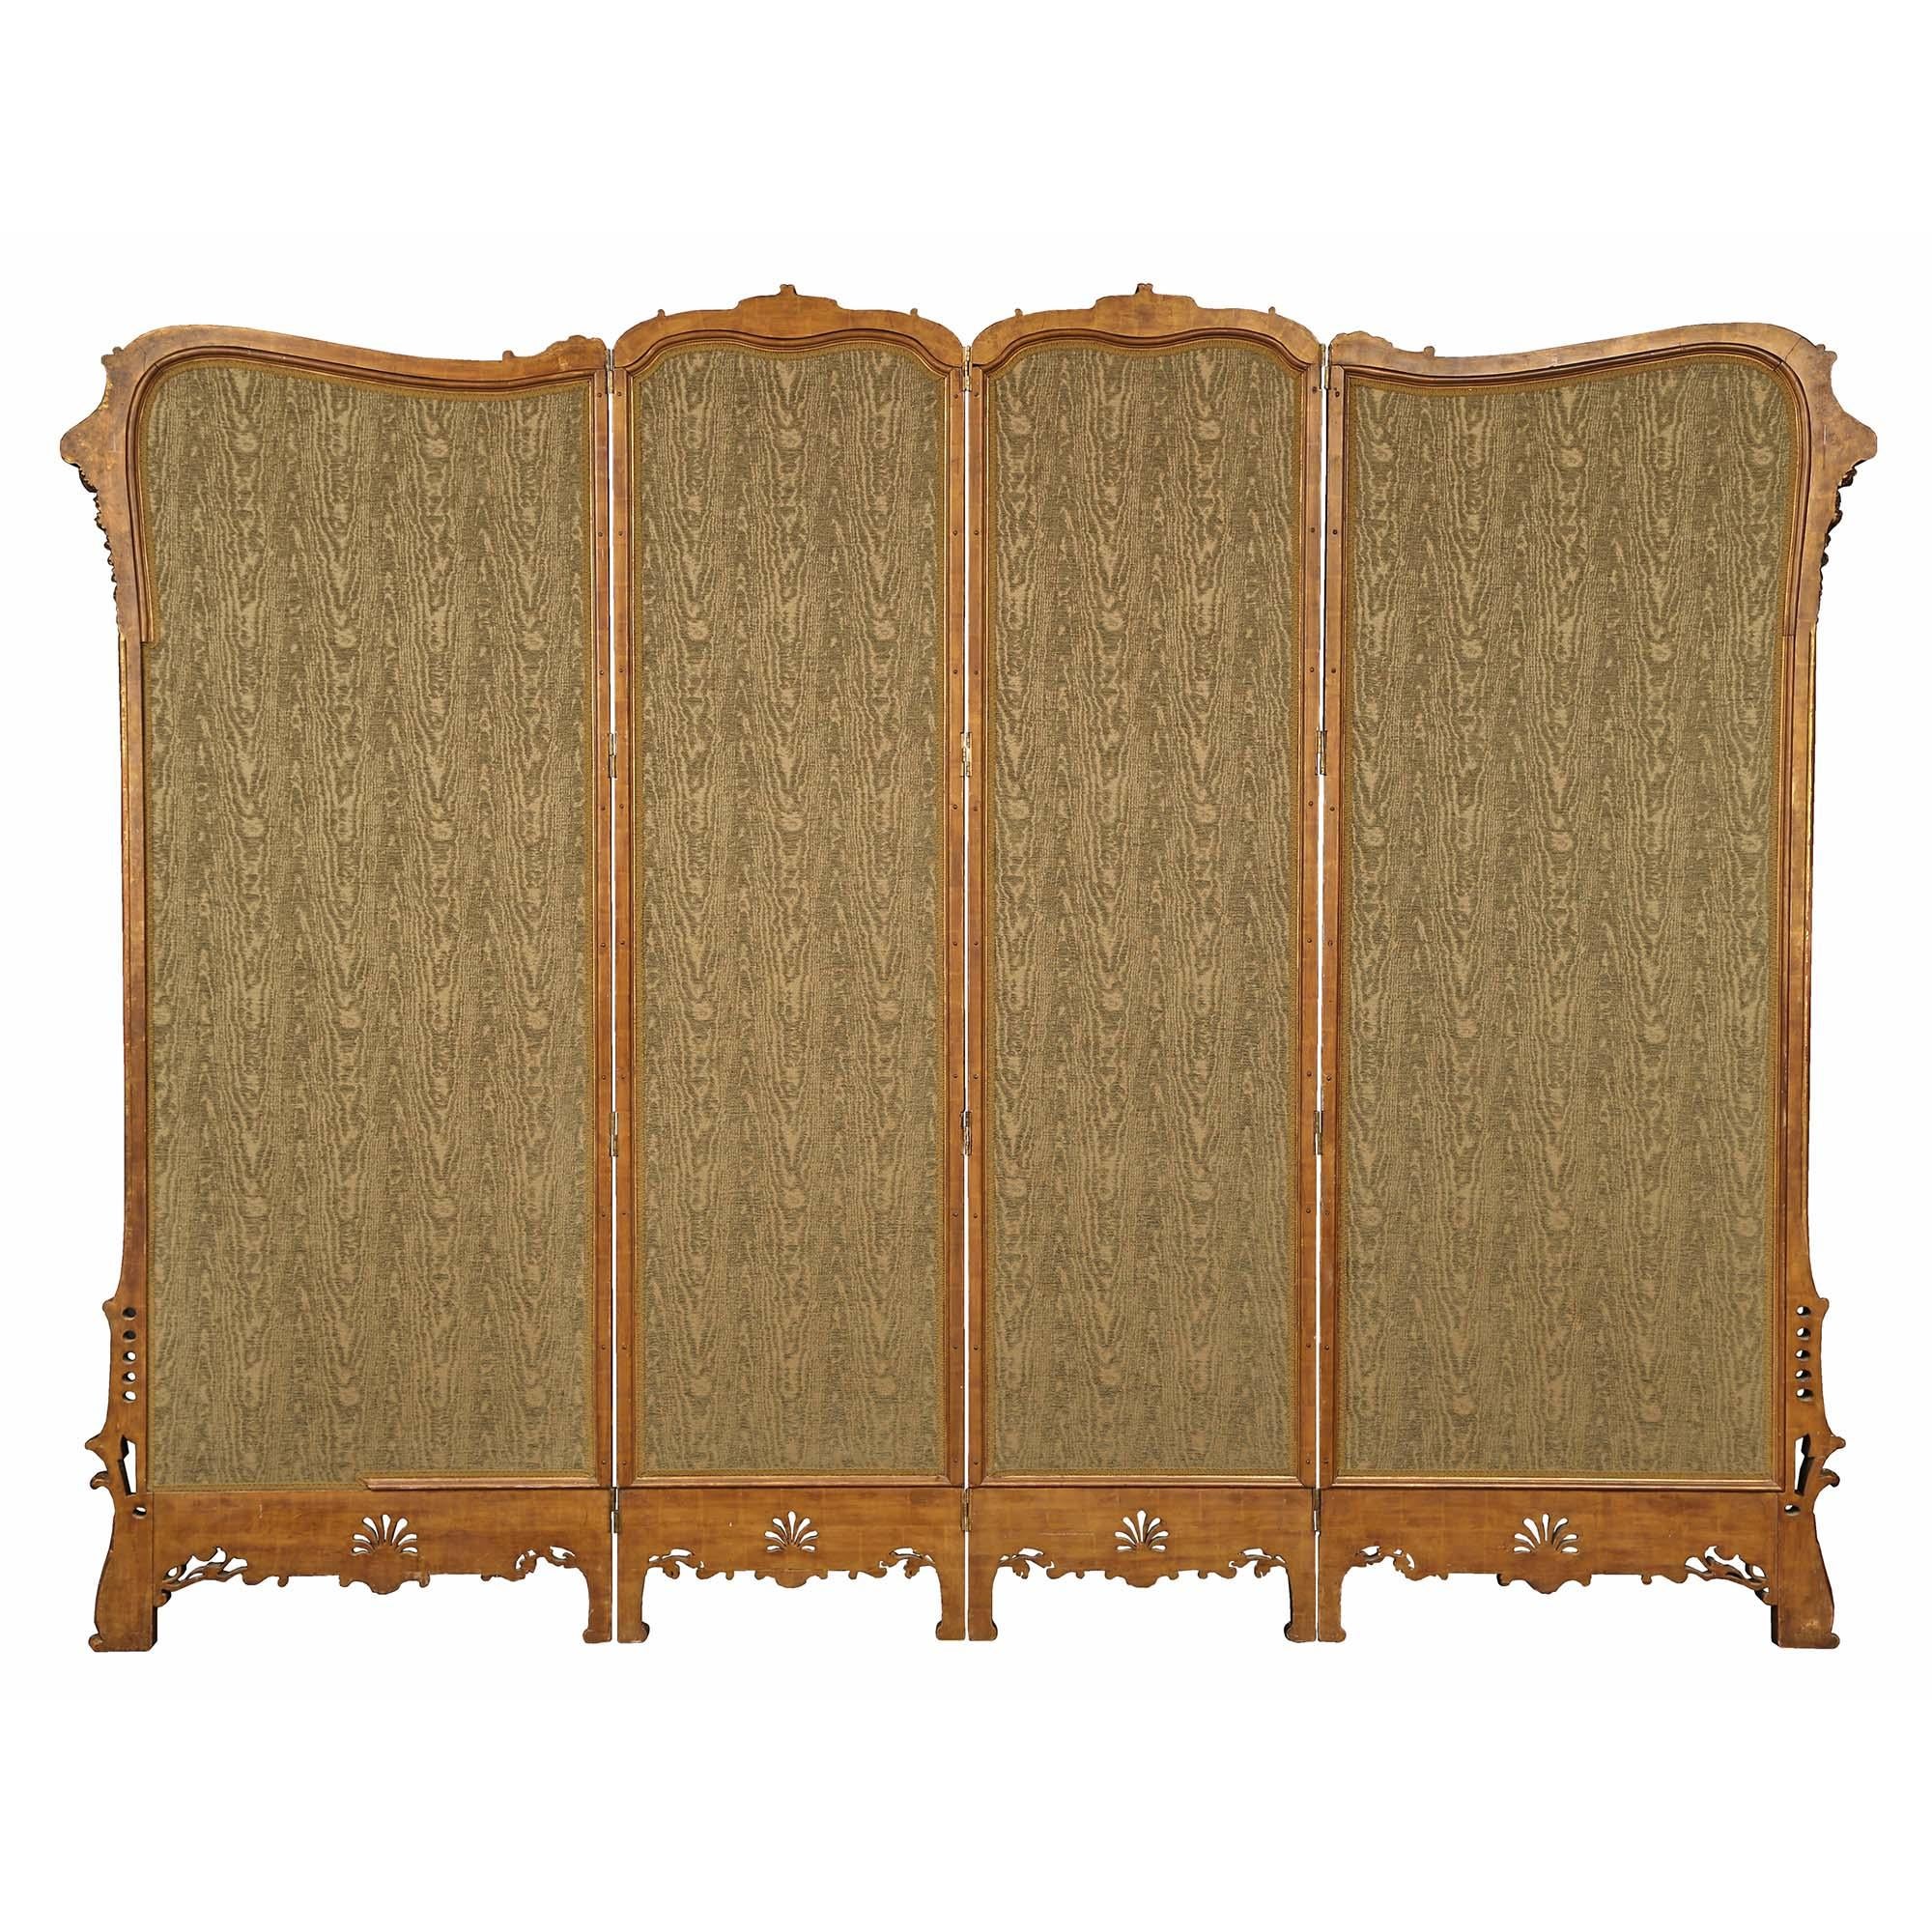 French 19th Century Louis XV Style Giltwood Four Paneled Screen For Sale 3